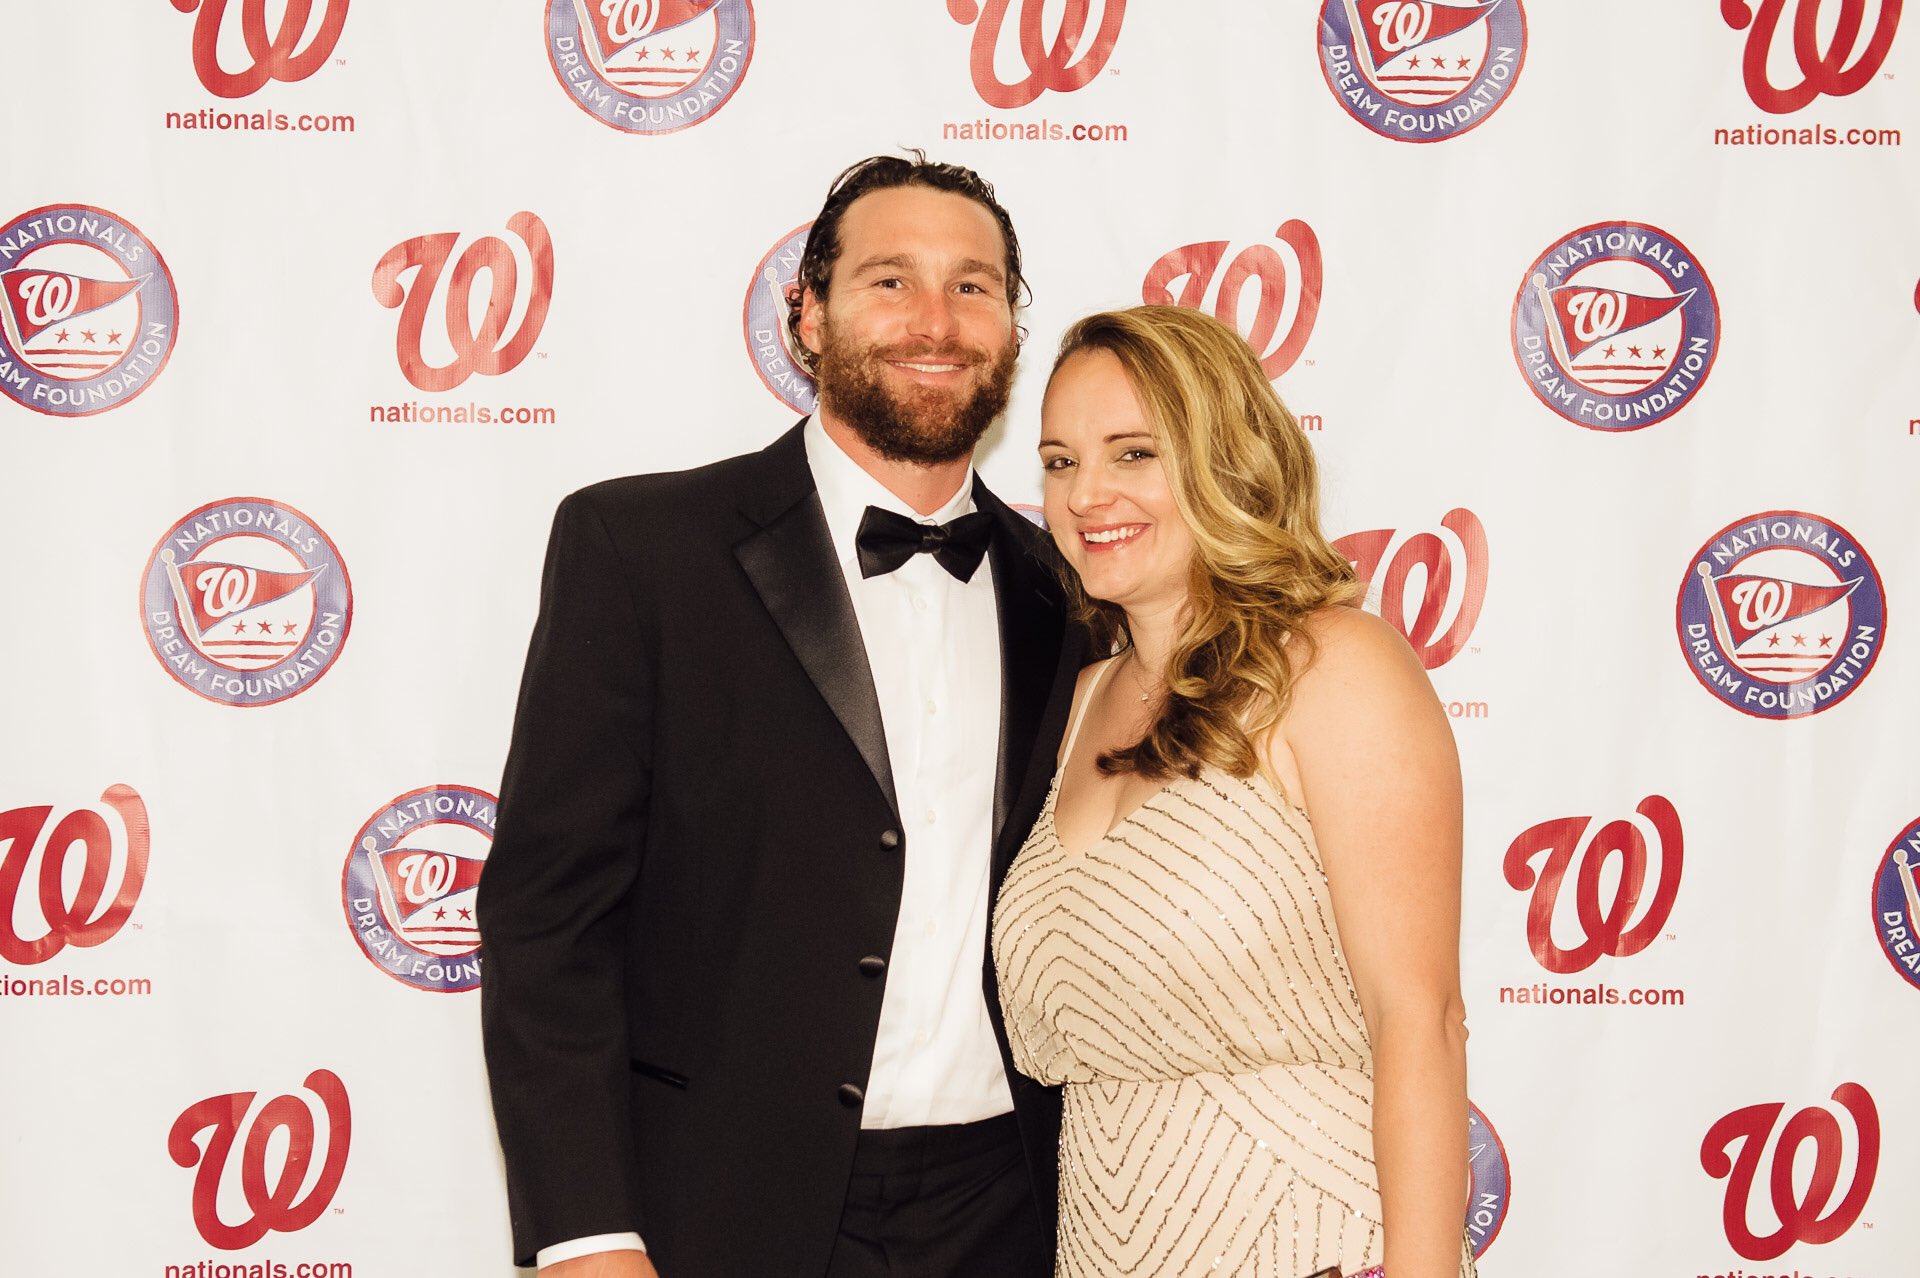 Washington Nationals on X: Daniel Murphy, @JLobaton21, @BatHoarder and  Oliver Perez pose with their wives. #DreamGala  / X